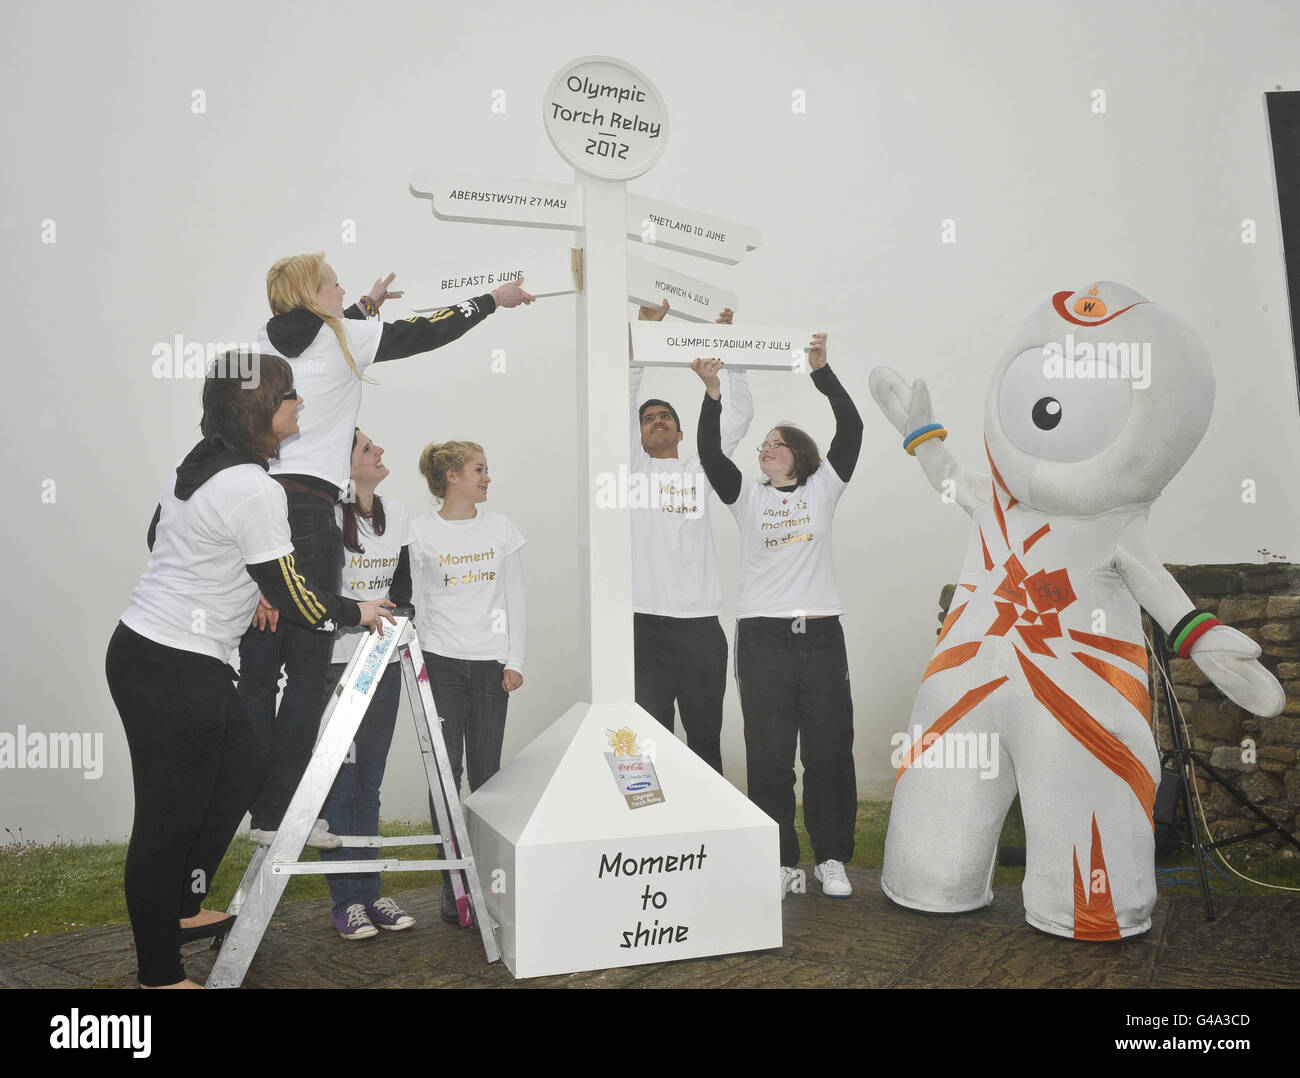 The Olympic mascot helps gold young ambassadors from across the UK place signs into the mock-up signpost at Lands End, Cornwall to mark the official announcement of the Olympic torch relay route across the UK. Stock Photo